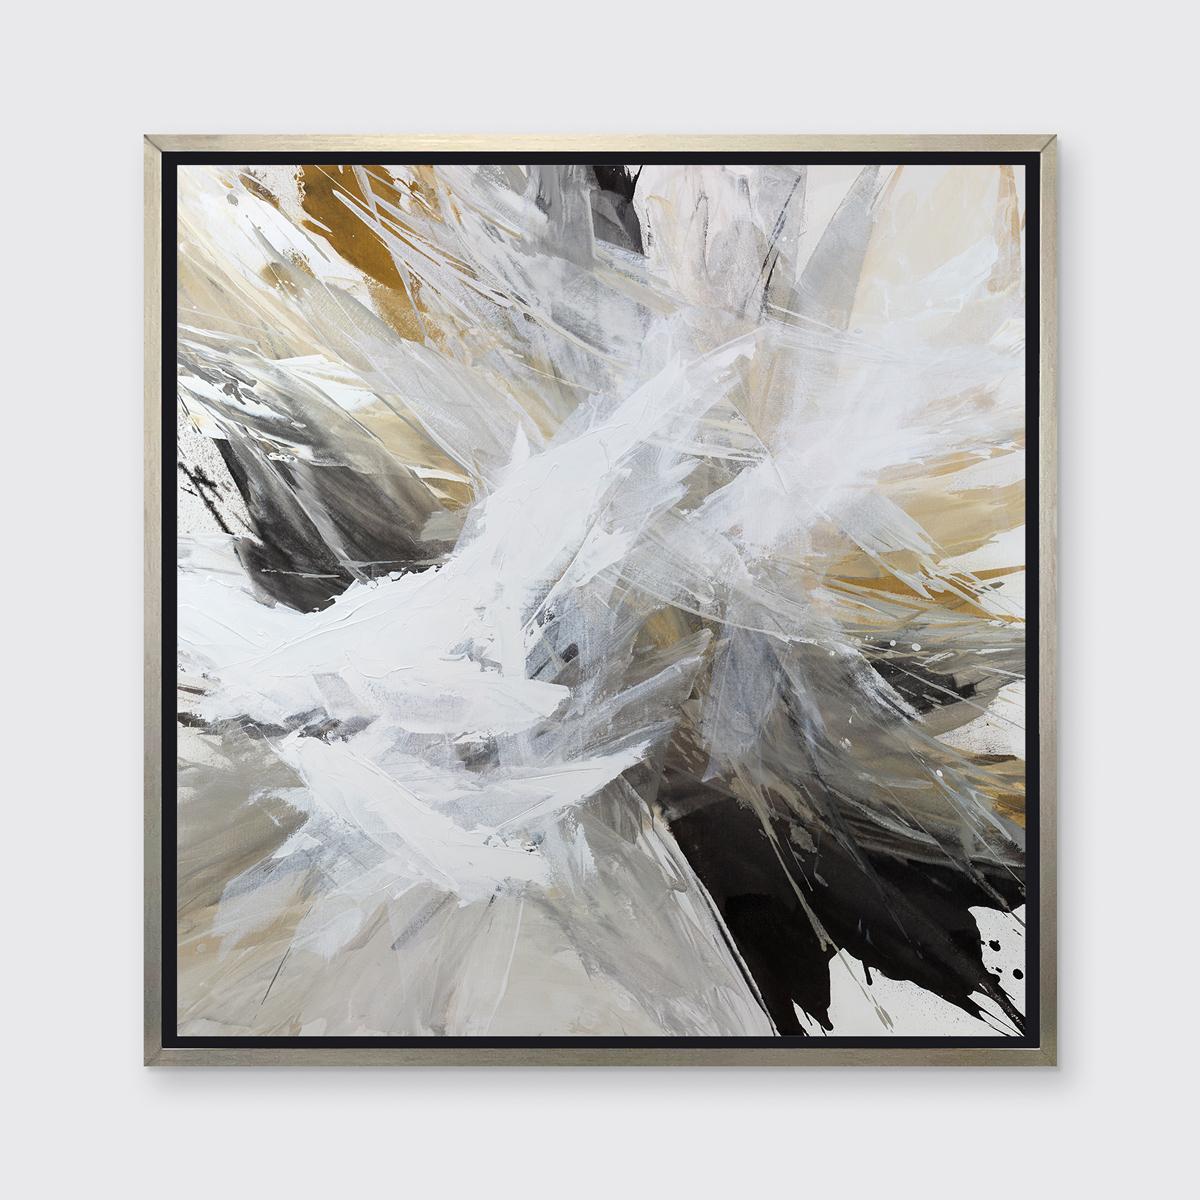 Teodora Guererra Abstract Print - "Today I Choose Palette Knives, " Framed Limited Edition Giclee Print, 48" x 48"